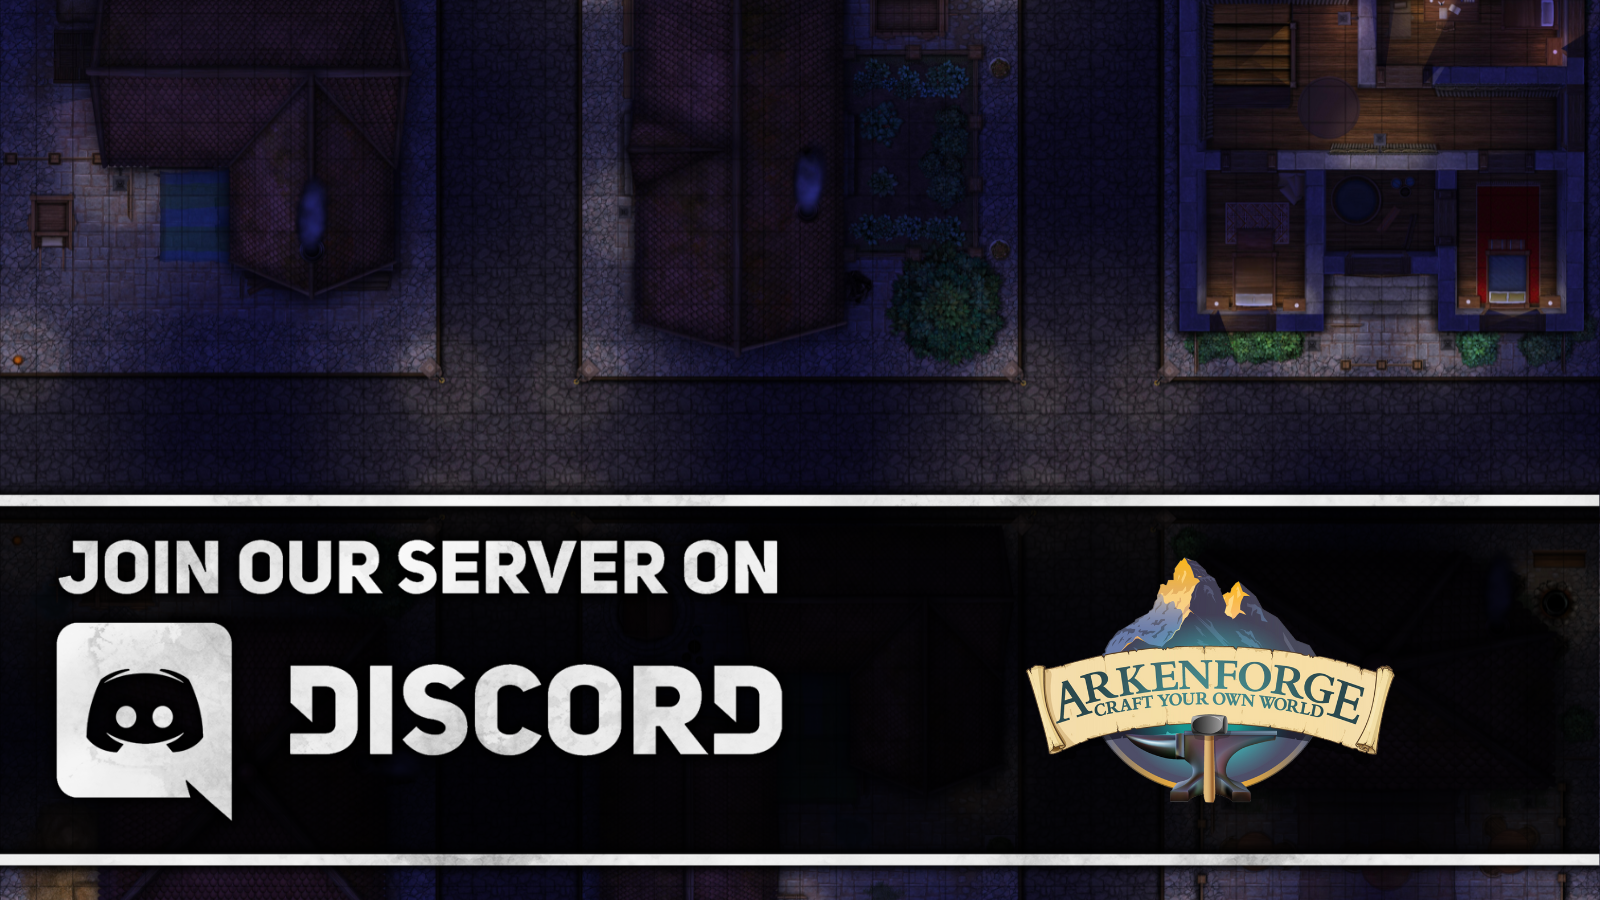 Join our Discord Server!